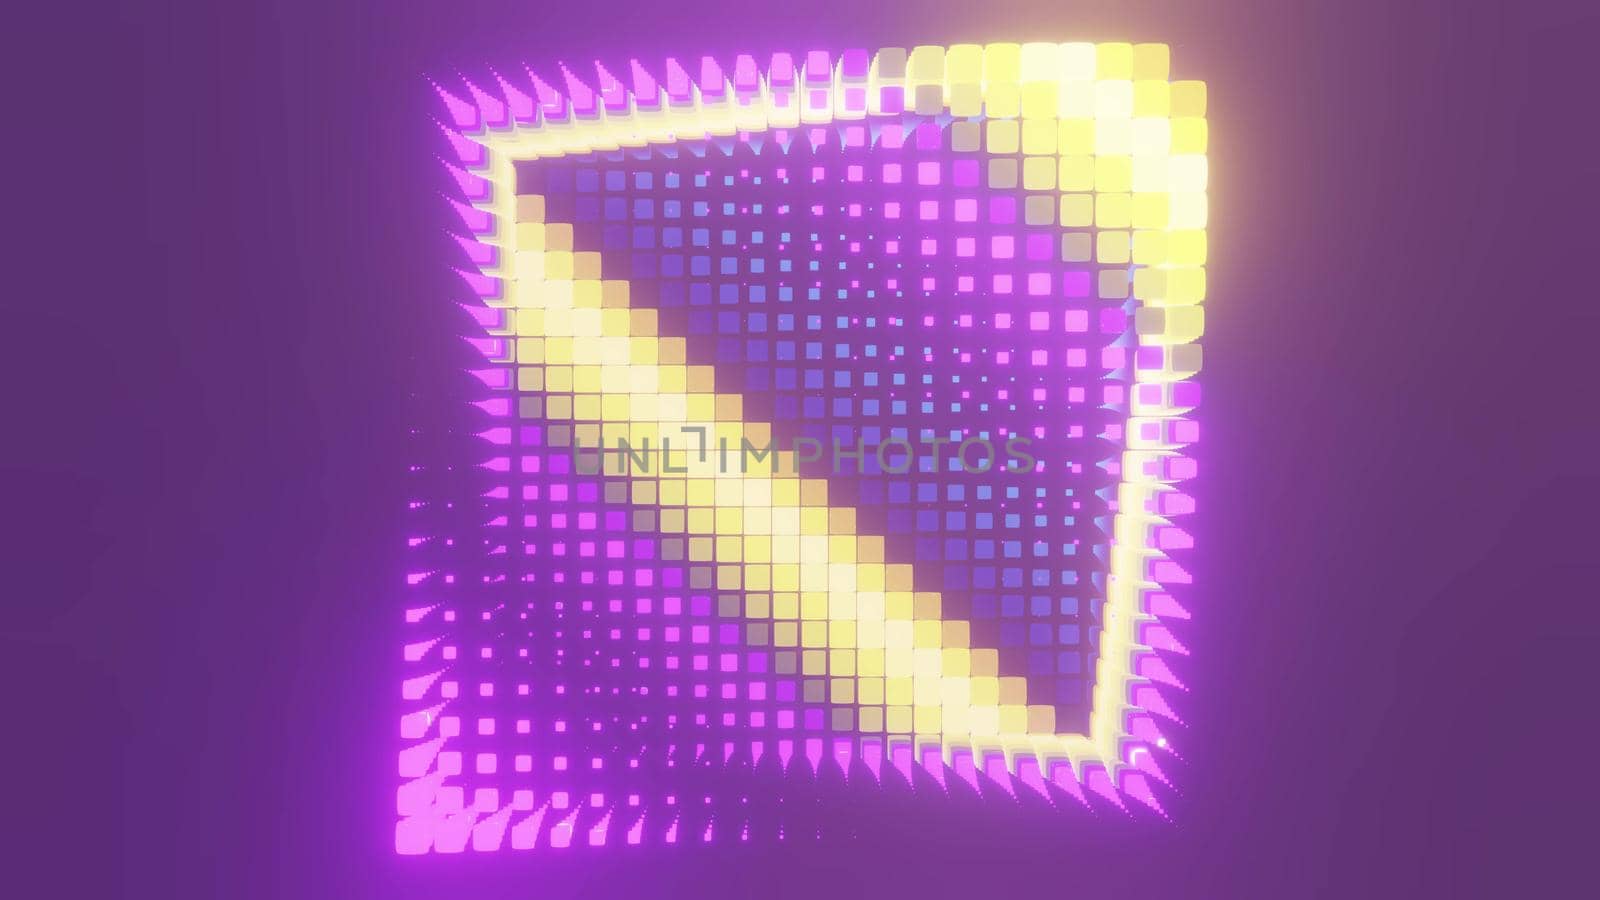 4K UHD 3D illustration of yellow and purple cubes glowing with neon light and forming wavy geometric ornament